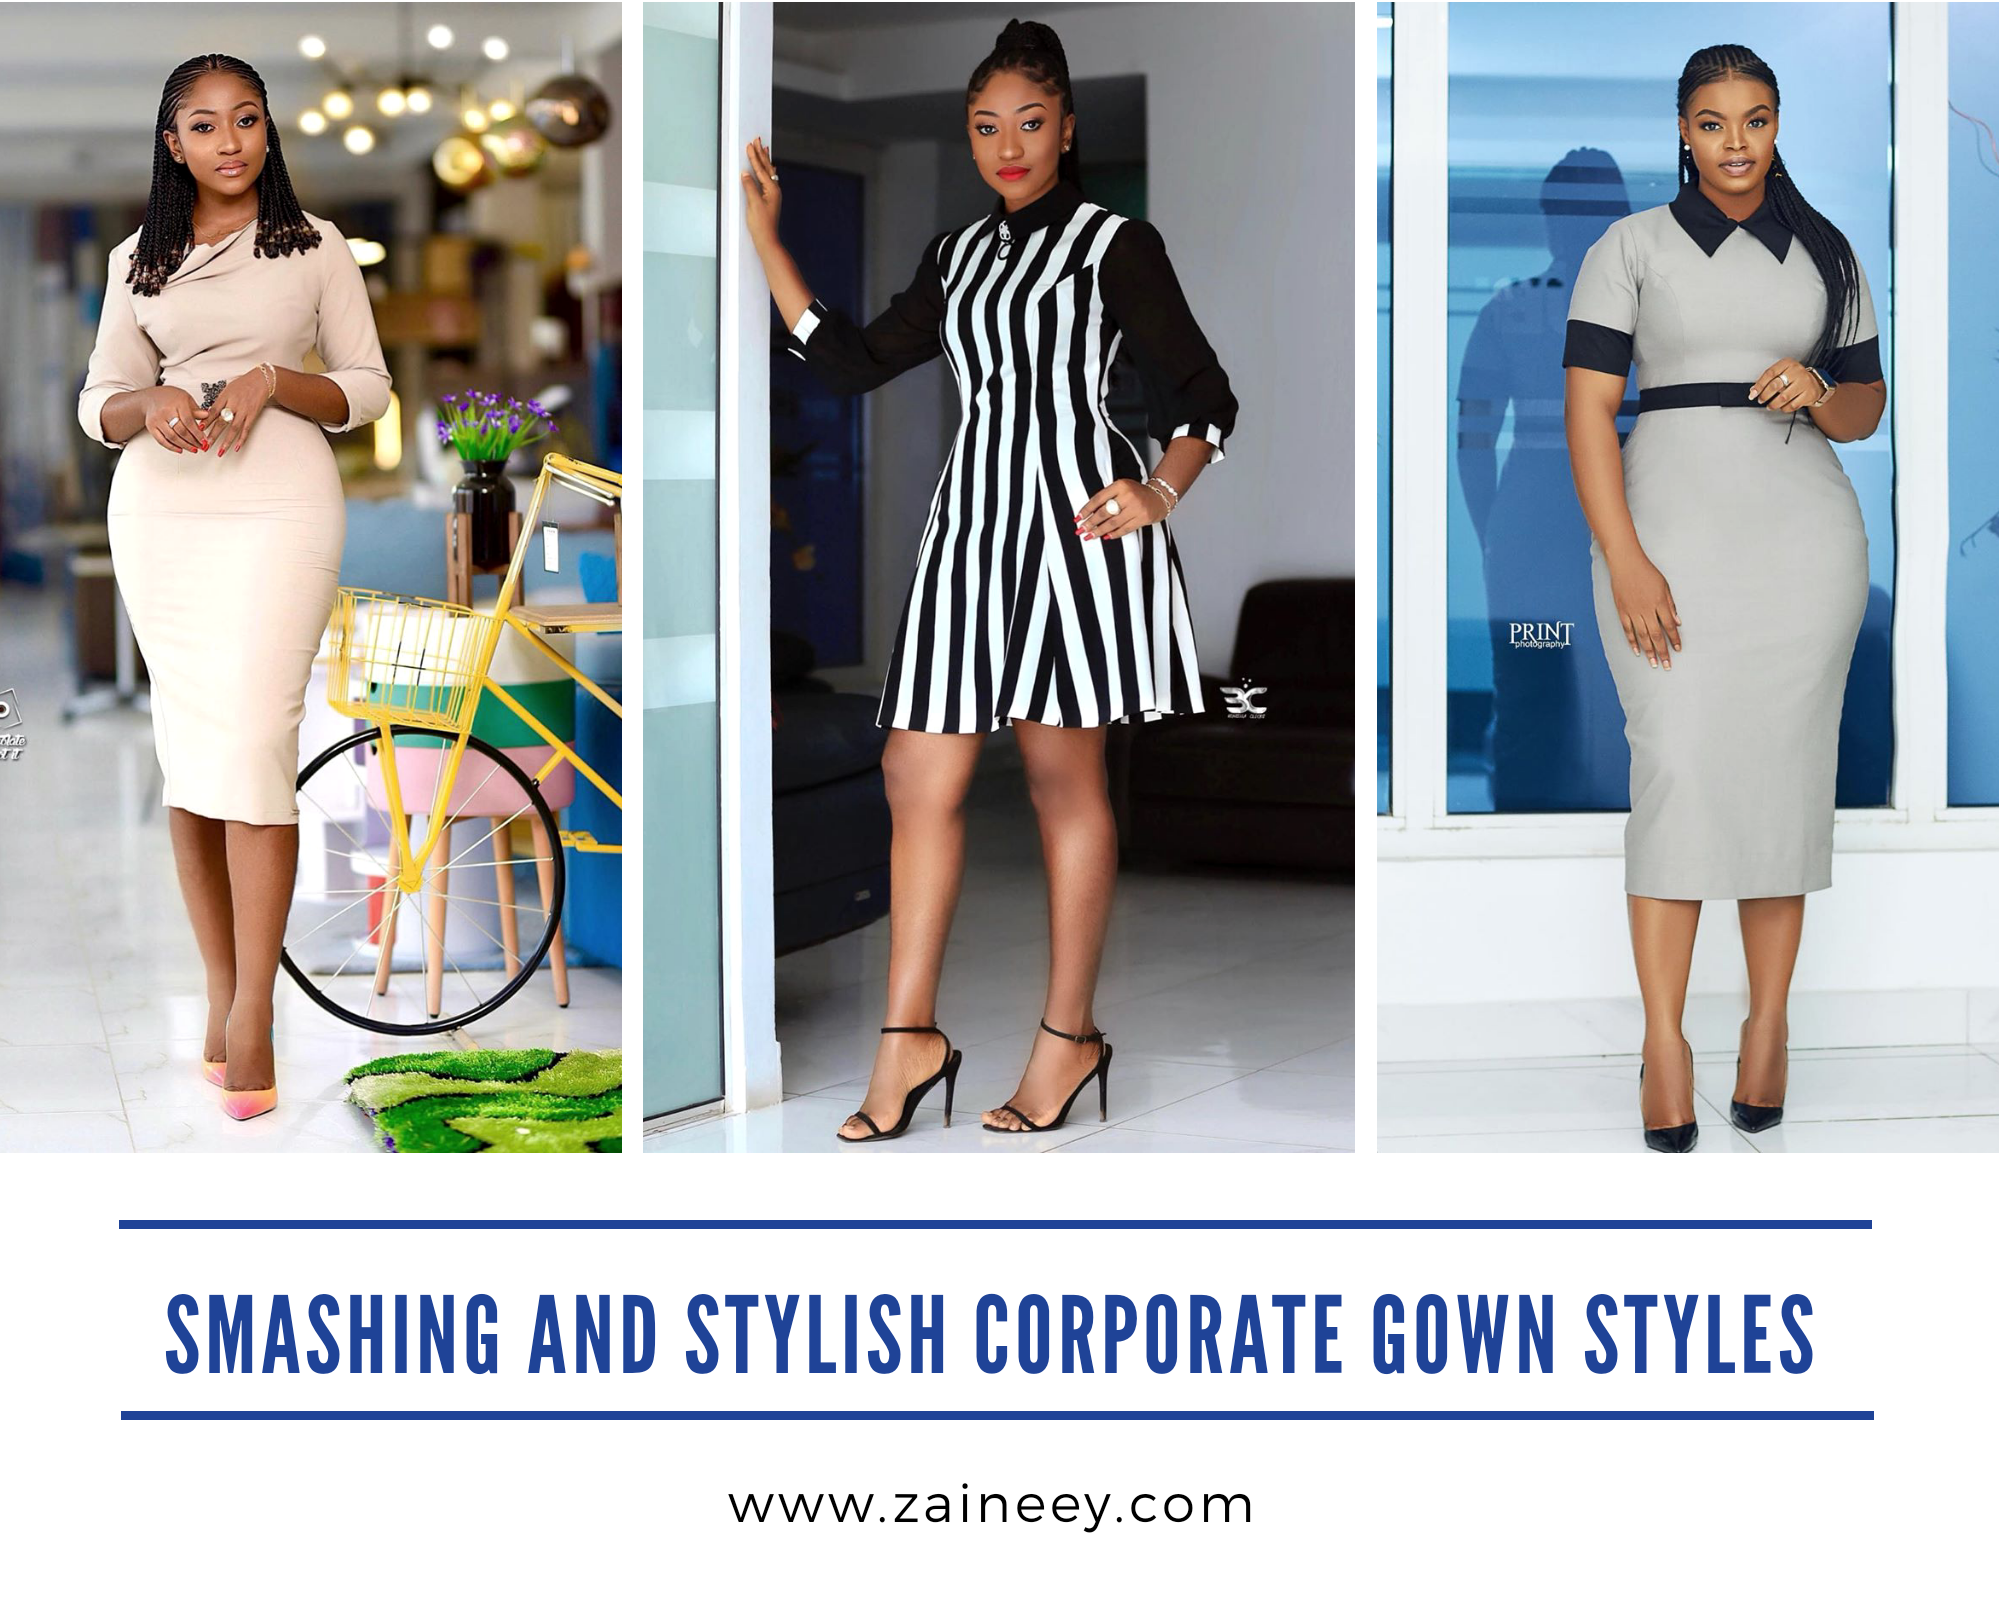 Office Dresses For Women: Smashing and Stylish Corporate Gowns Styles for Ladies 